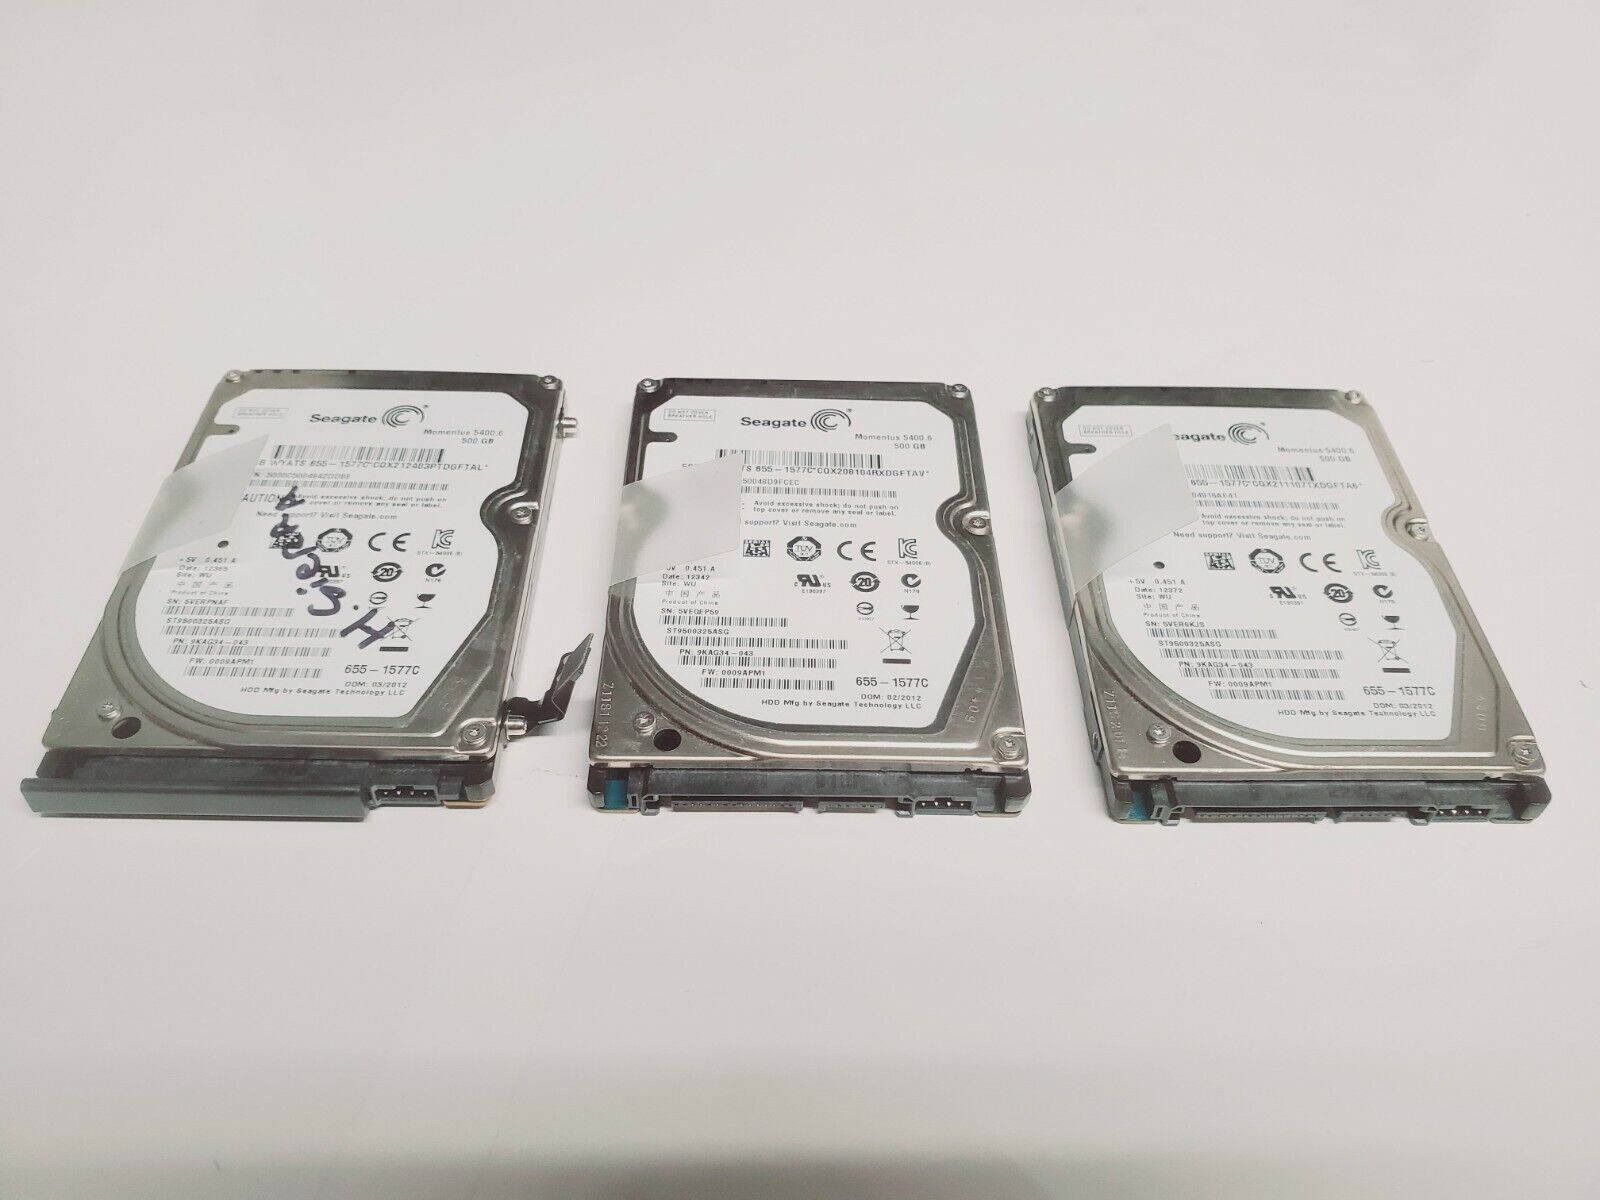 LOT of 3 Seagate Momentus 5400.6 ST9500325ASG PN:9KAG34-043 500GB 2.5